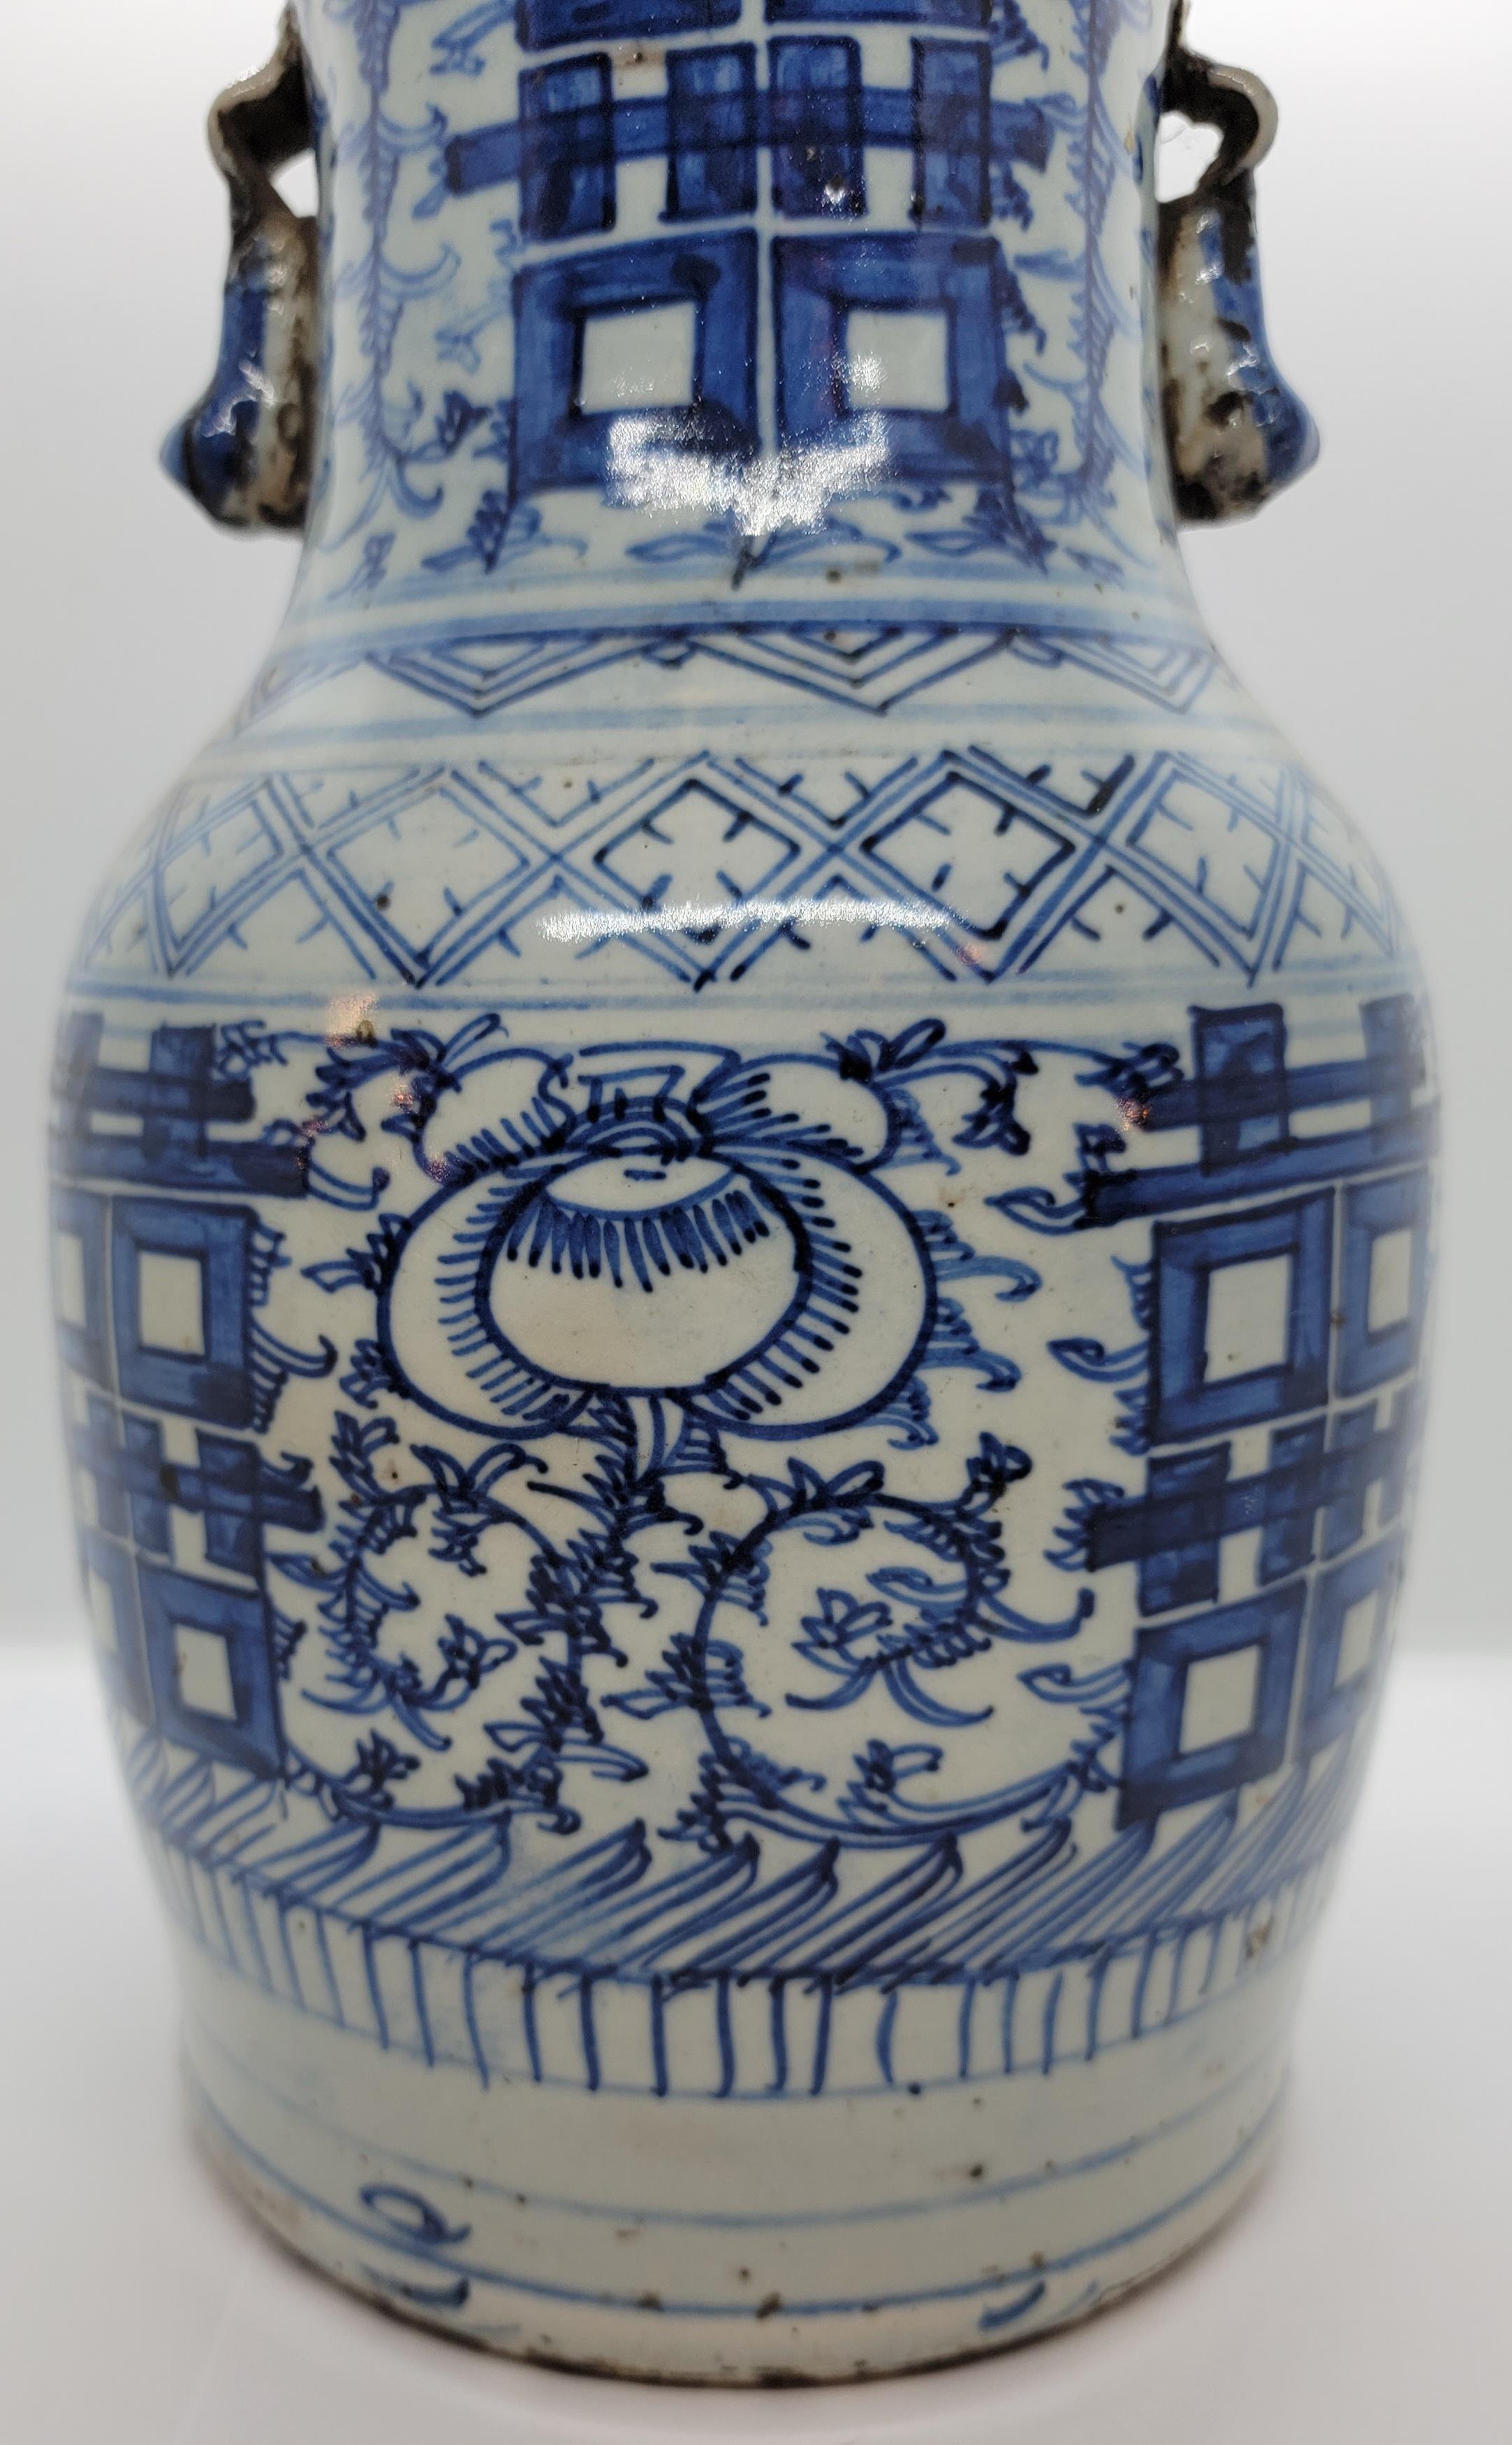 19th century Oriental Pottery Bridal Vase. Wonderful age and patina handles are small tight and sturdy. The vase has wear consistent of age. Wonderful dark blue cobalt colored design.
Approx. 12.5 h x 7 deep.
Usually given as wedding gift to